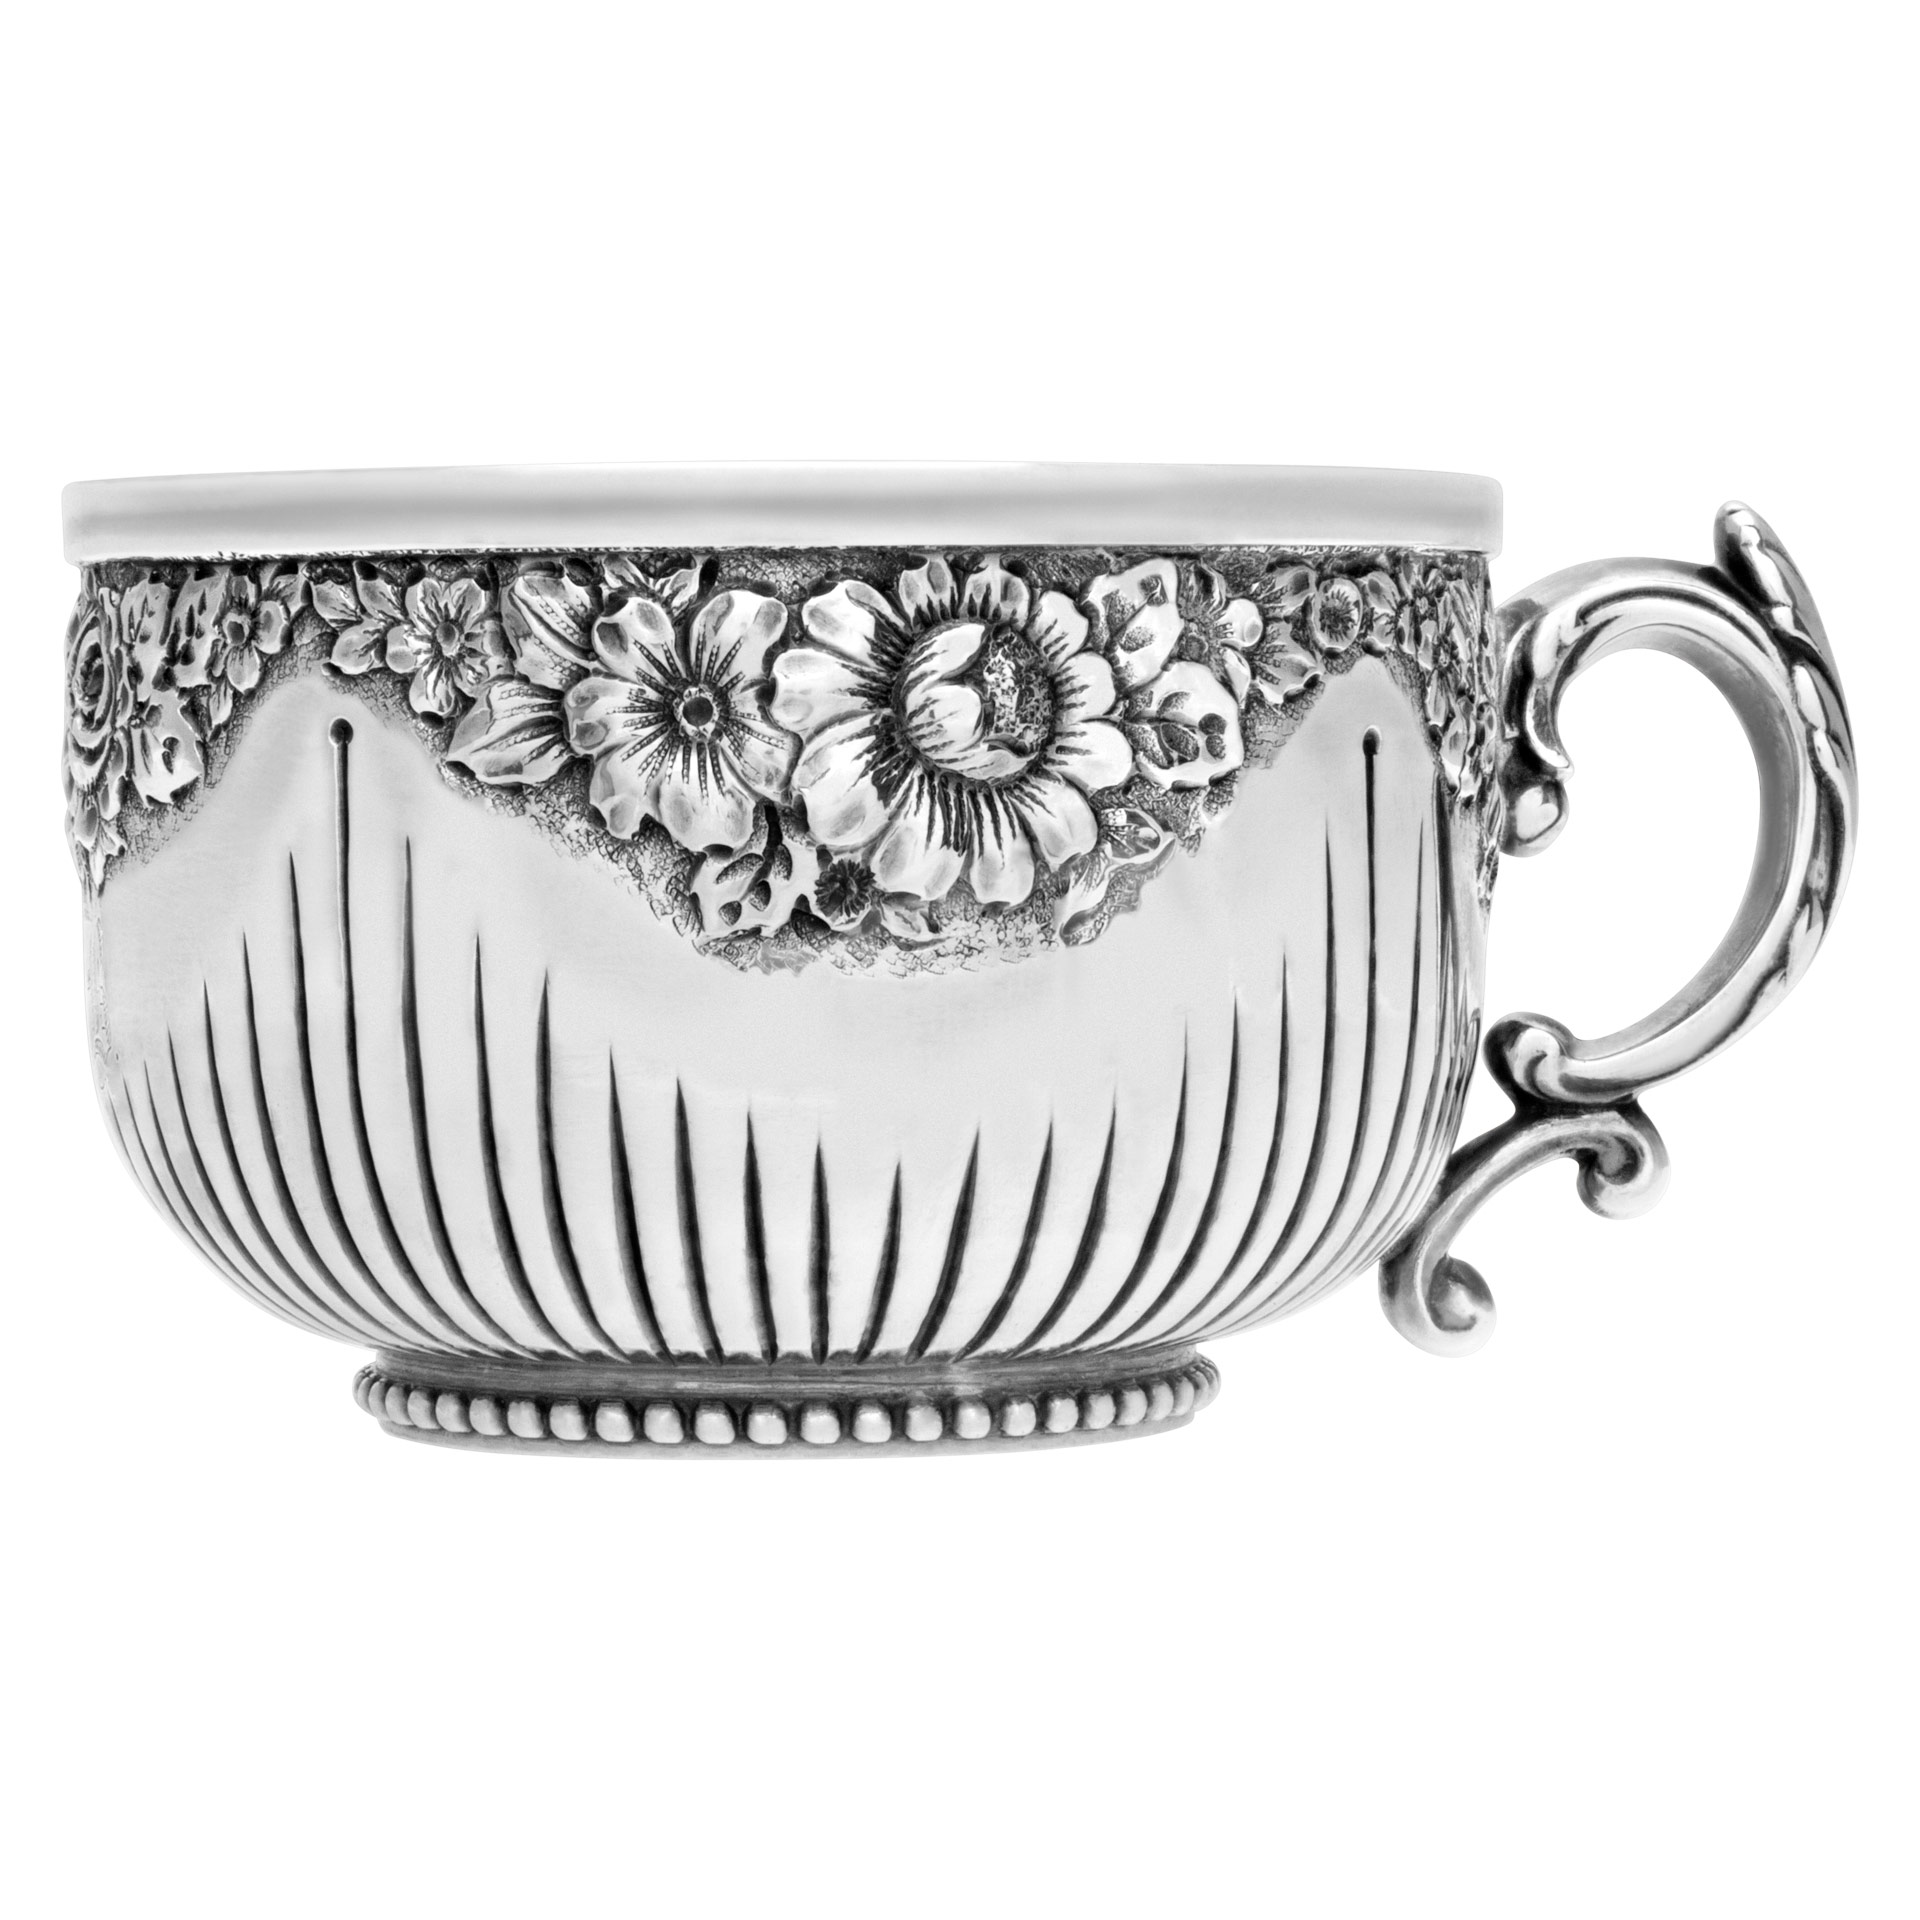  "Cluny" Ptd 1883, Pair Of Sterling Silver Demi-Tasse Coffe Cup With Matching Saucer. image 1